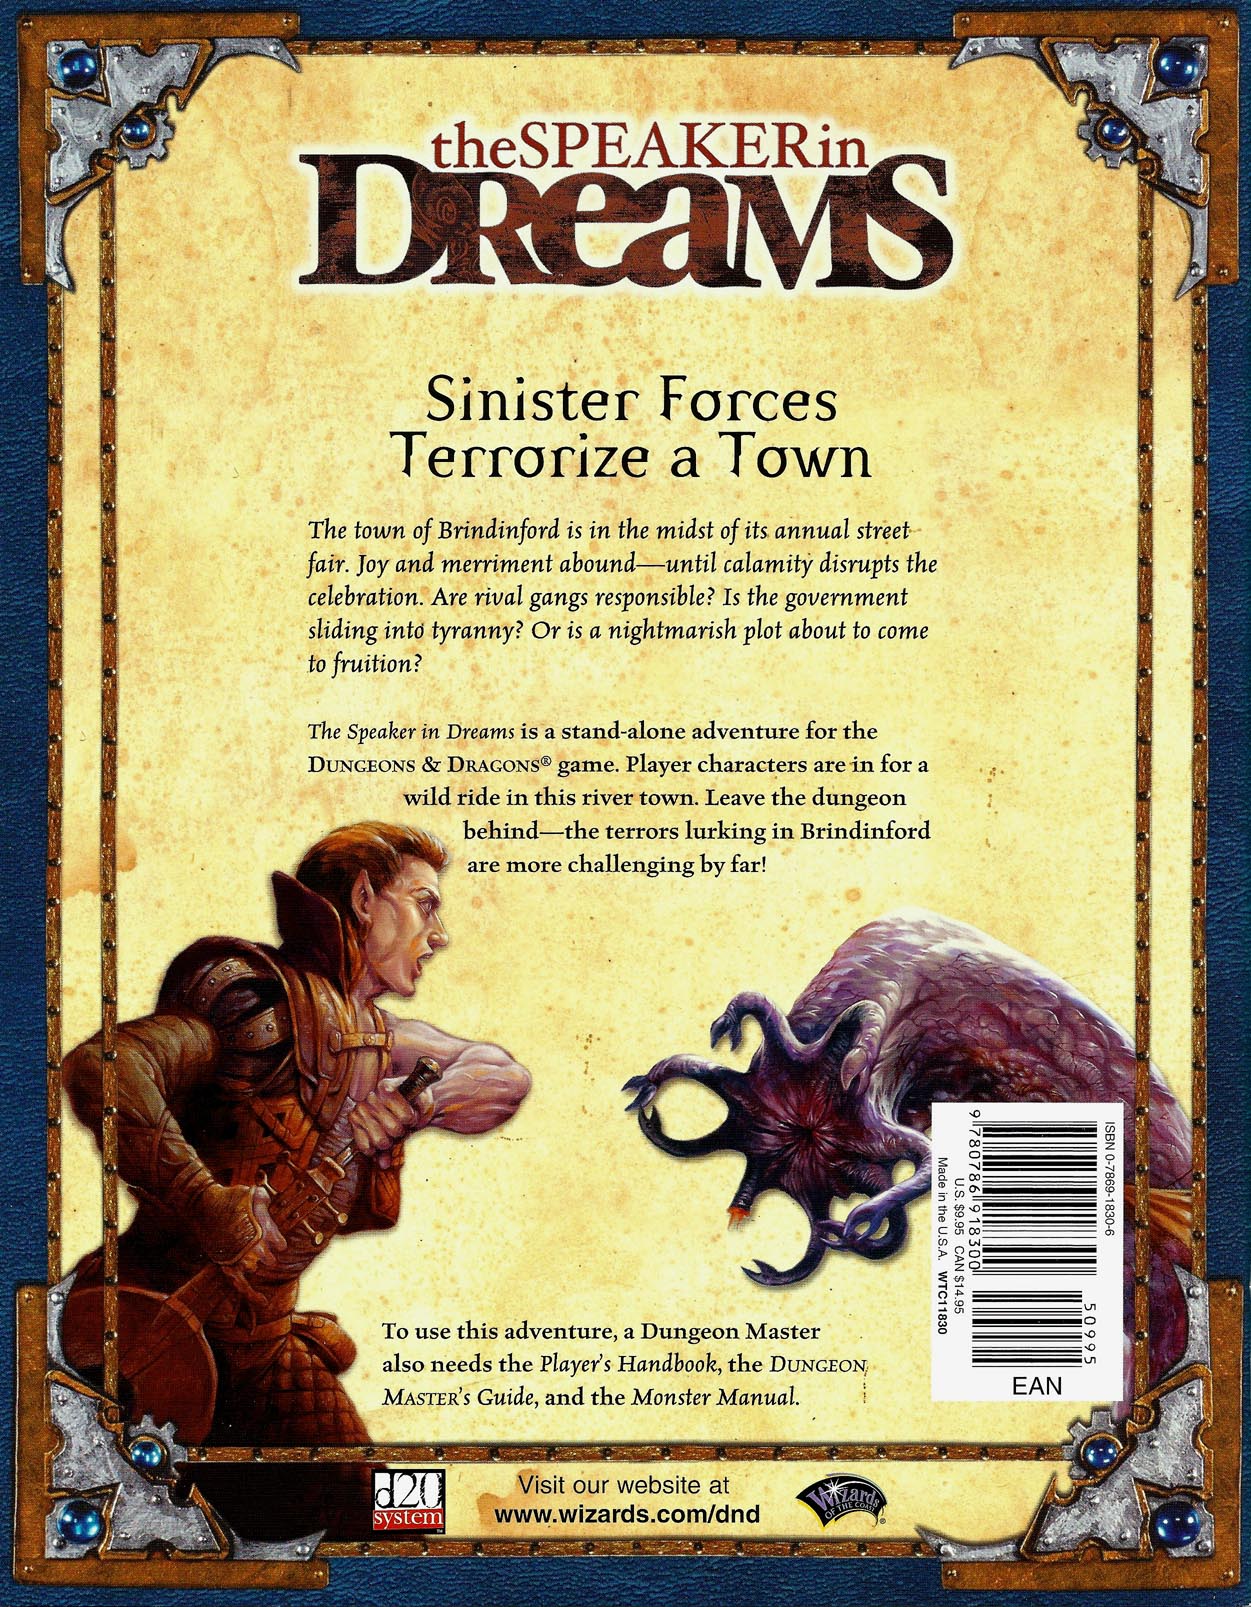 DUNGEONS & DRAGONS - THE SPEAKER IN DREAMS - 11830 - RPG RELIQUARY